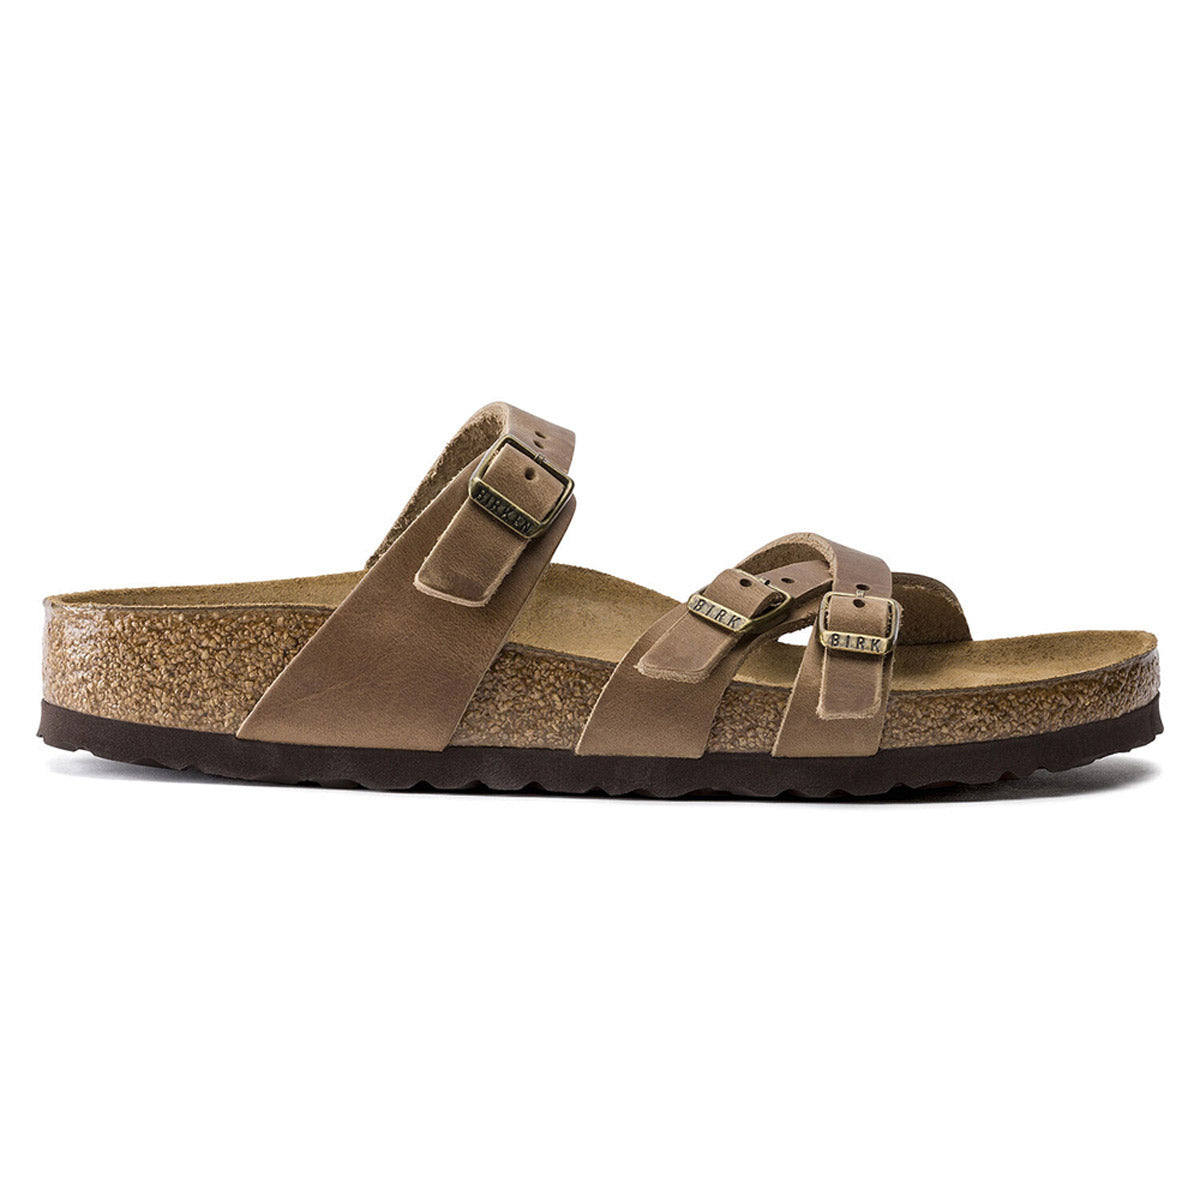 Brown Birkenstock Franca tobacco oiled leather double-strap sandals with buckles on a white background.